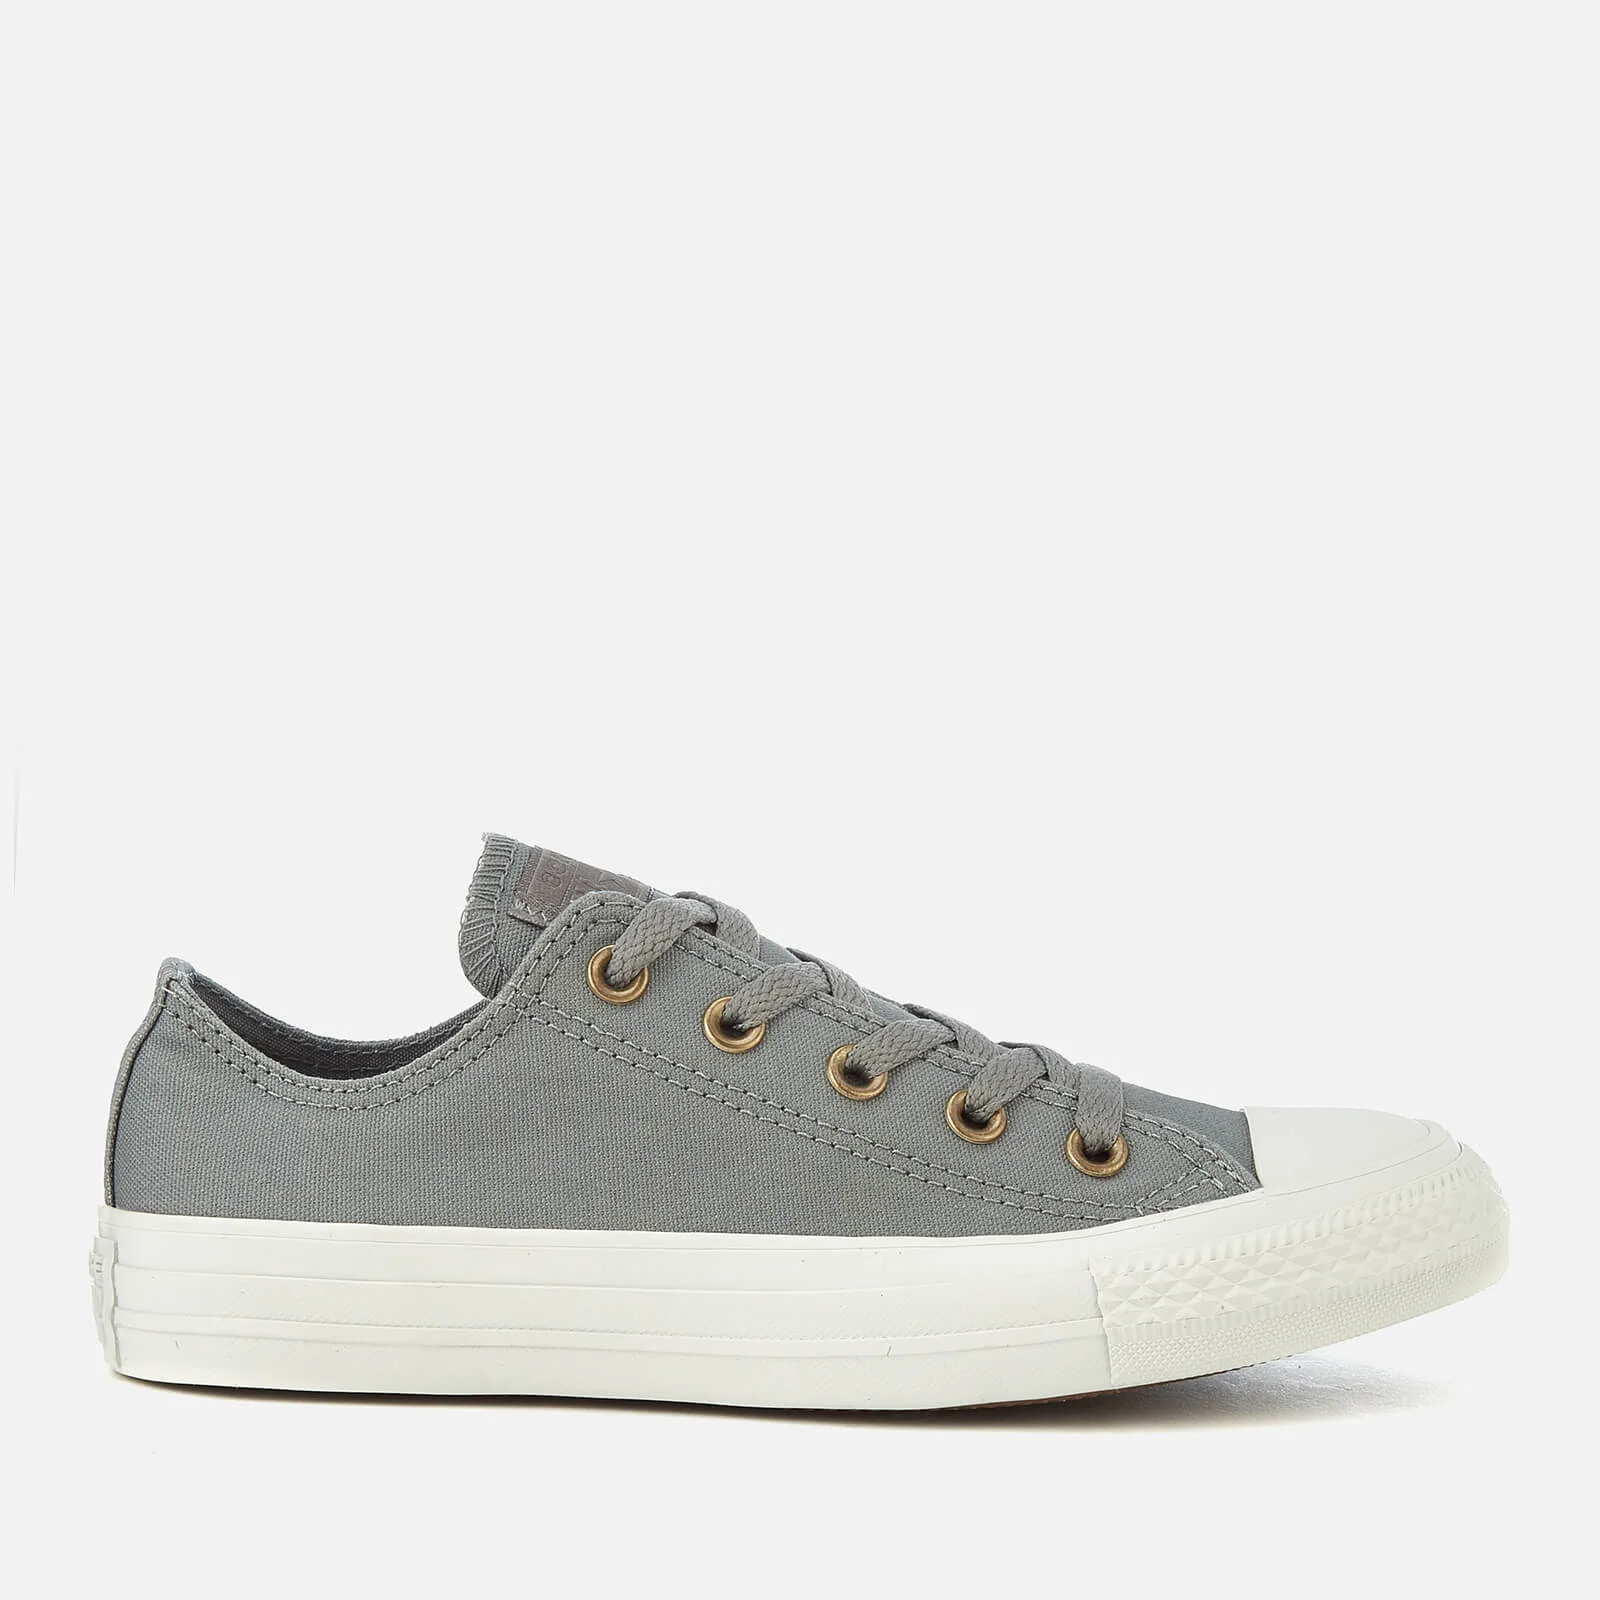 Converse Women's Chuck Taylor All Star Ox Trainers - Mason/Mouse Image 1